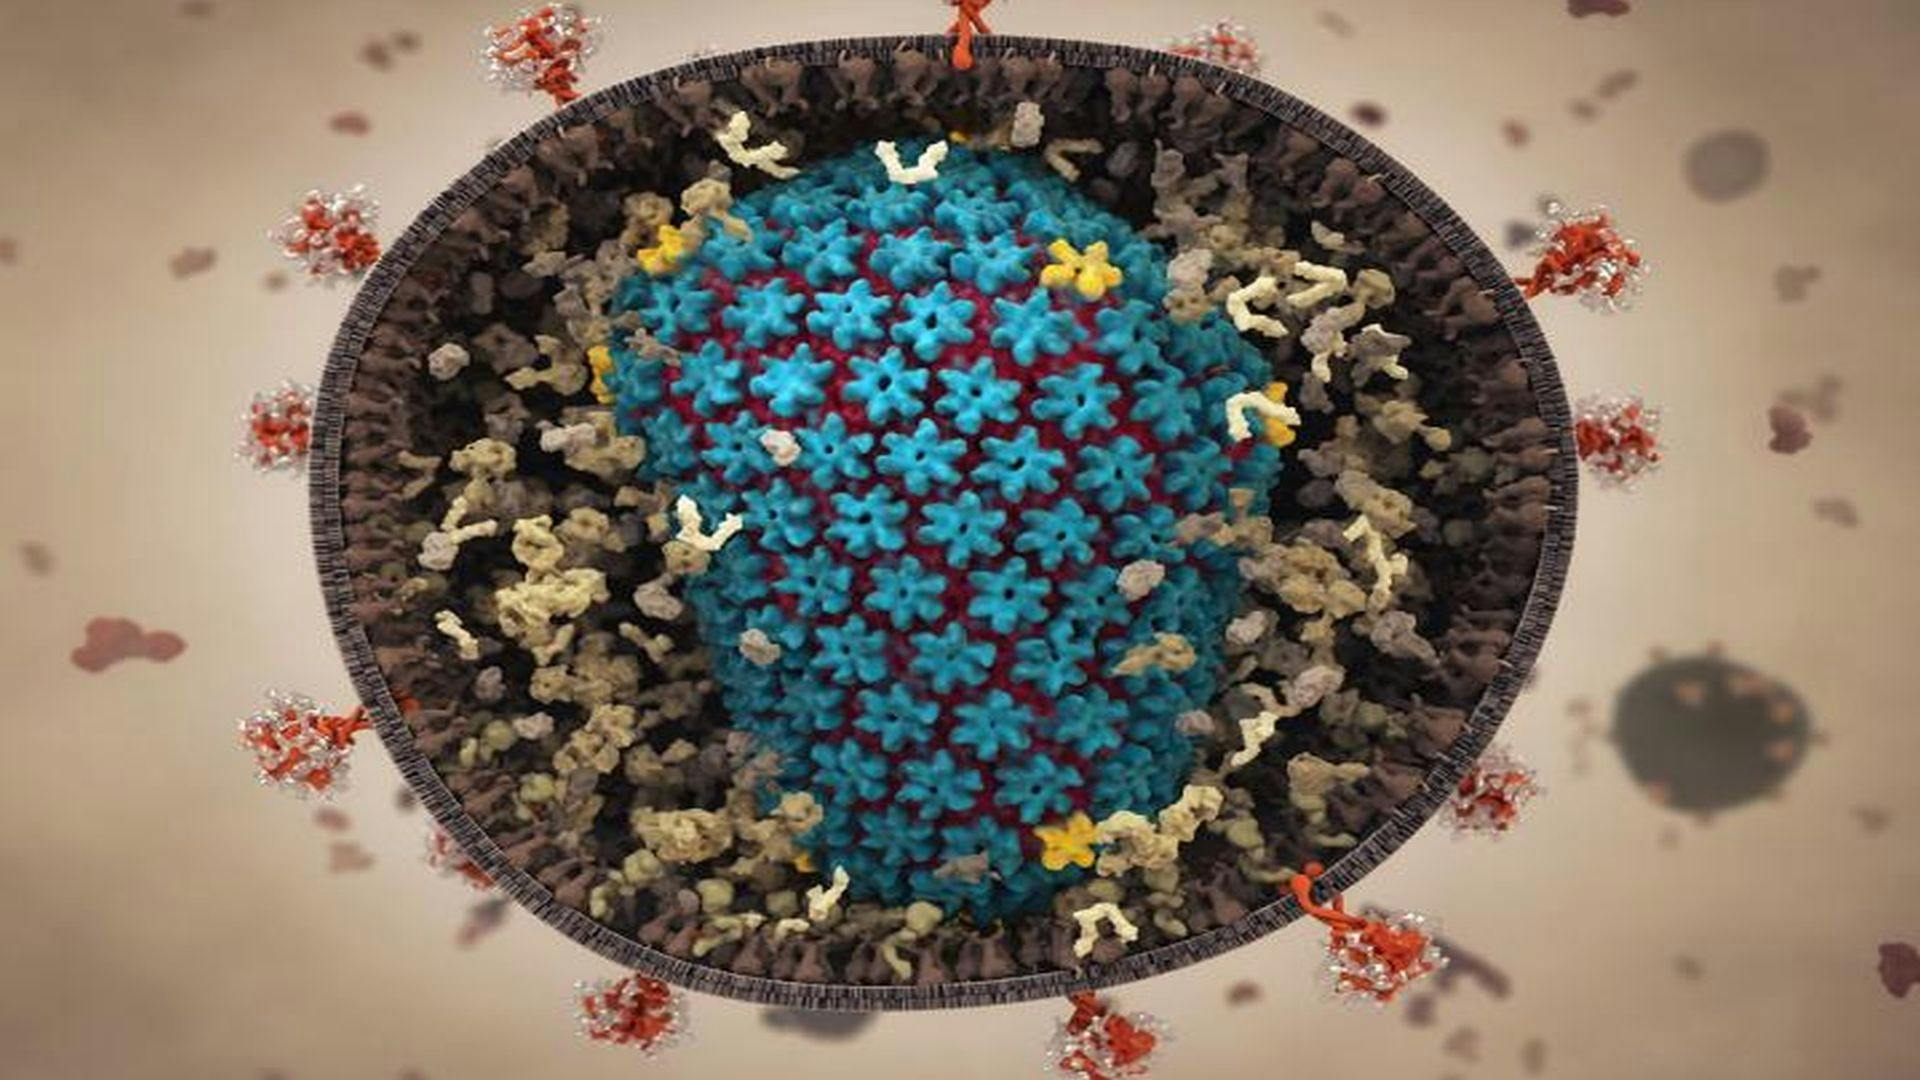 Simulation Shows HIV Capsid Interacting With Its Environment